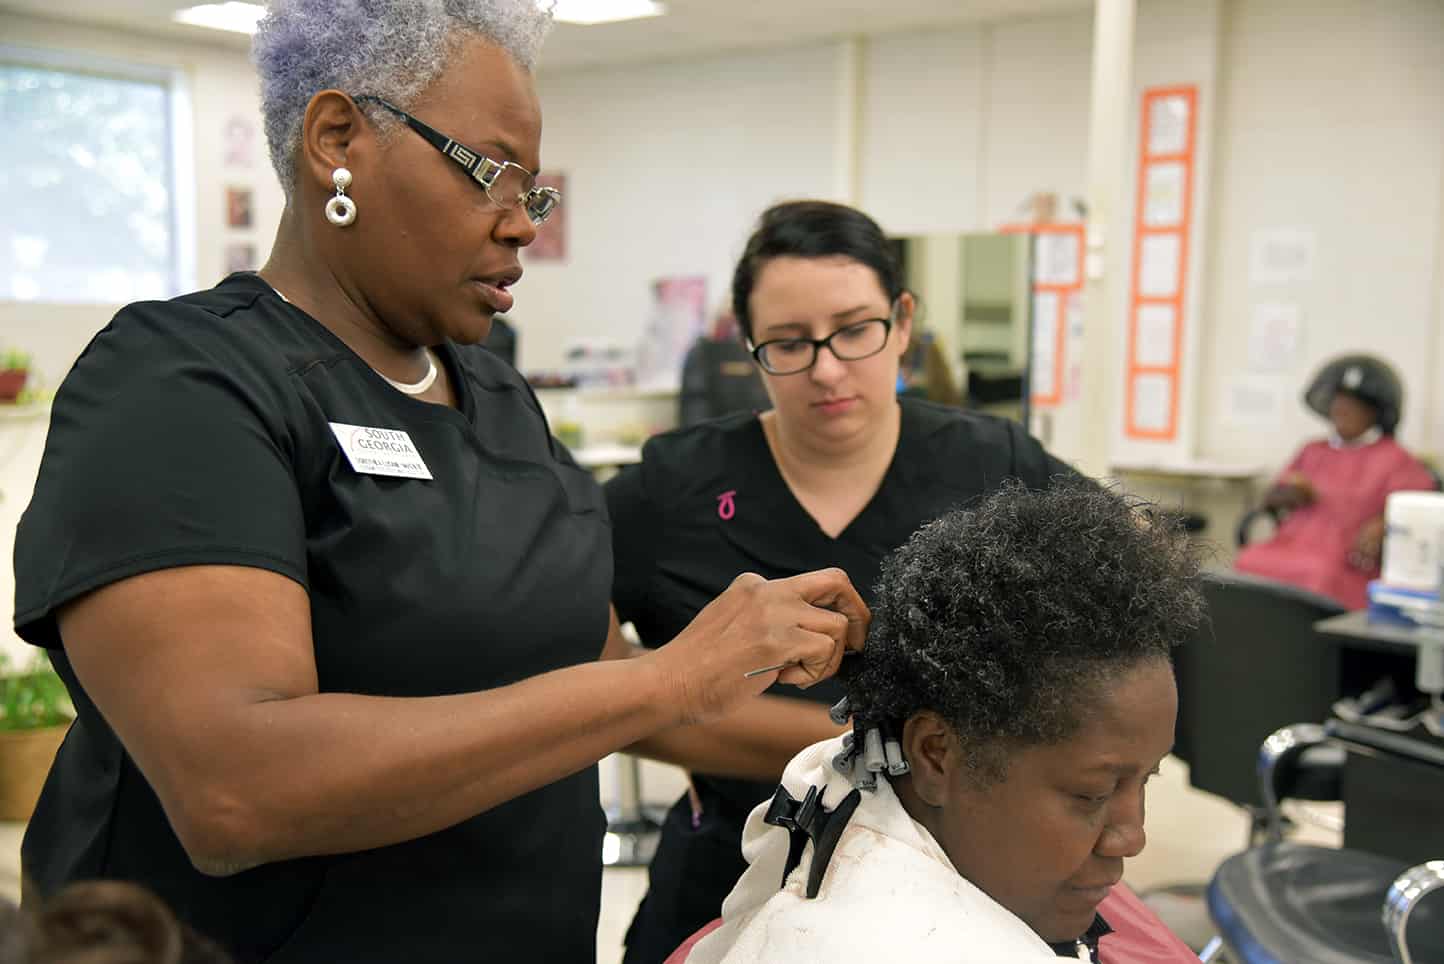 SGTC Cosmetology instructor Dorthea McKenzie (LEFT) is pictured with Destiny Baker (STANDING) working on a customer's hair. THE COSMETOLOGY PROGRAM WAS RECENTLY RECOGNIZED AS A TOP COSMETOLOGY PROGRAM IN THE COUNTRY for the second year in a row.